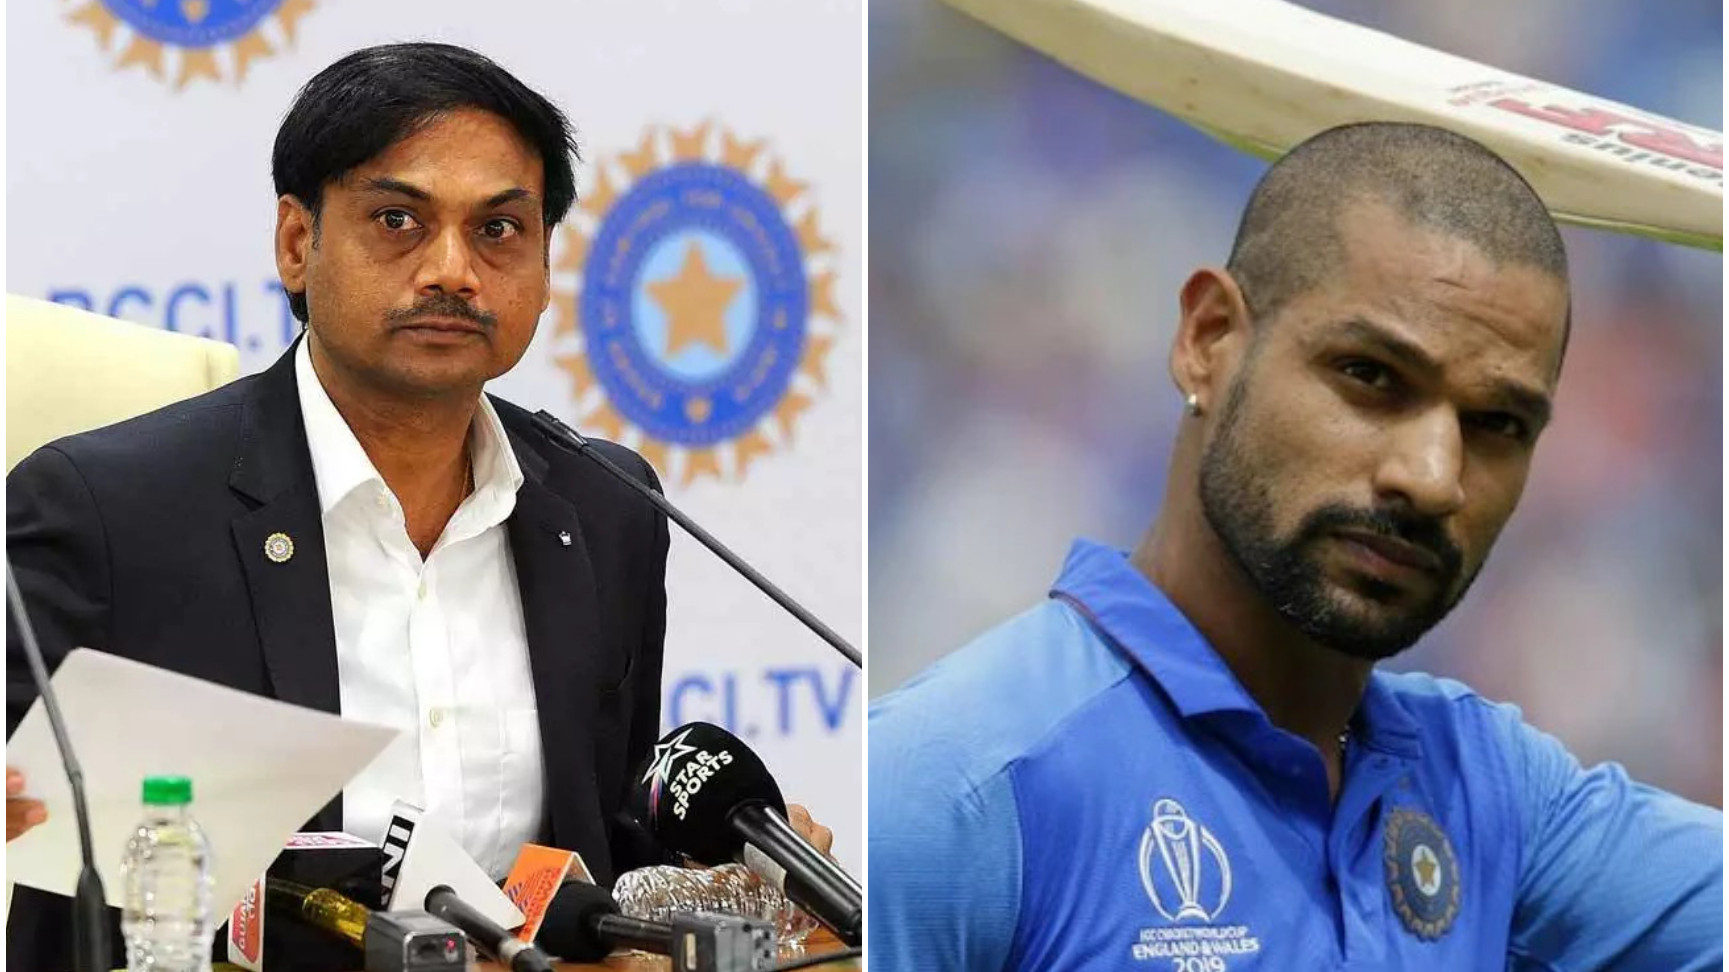 “They could have given Dhawan an opportunity in this series before completely overlooking him,” says MSK Prasad